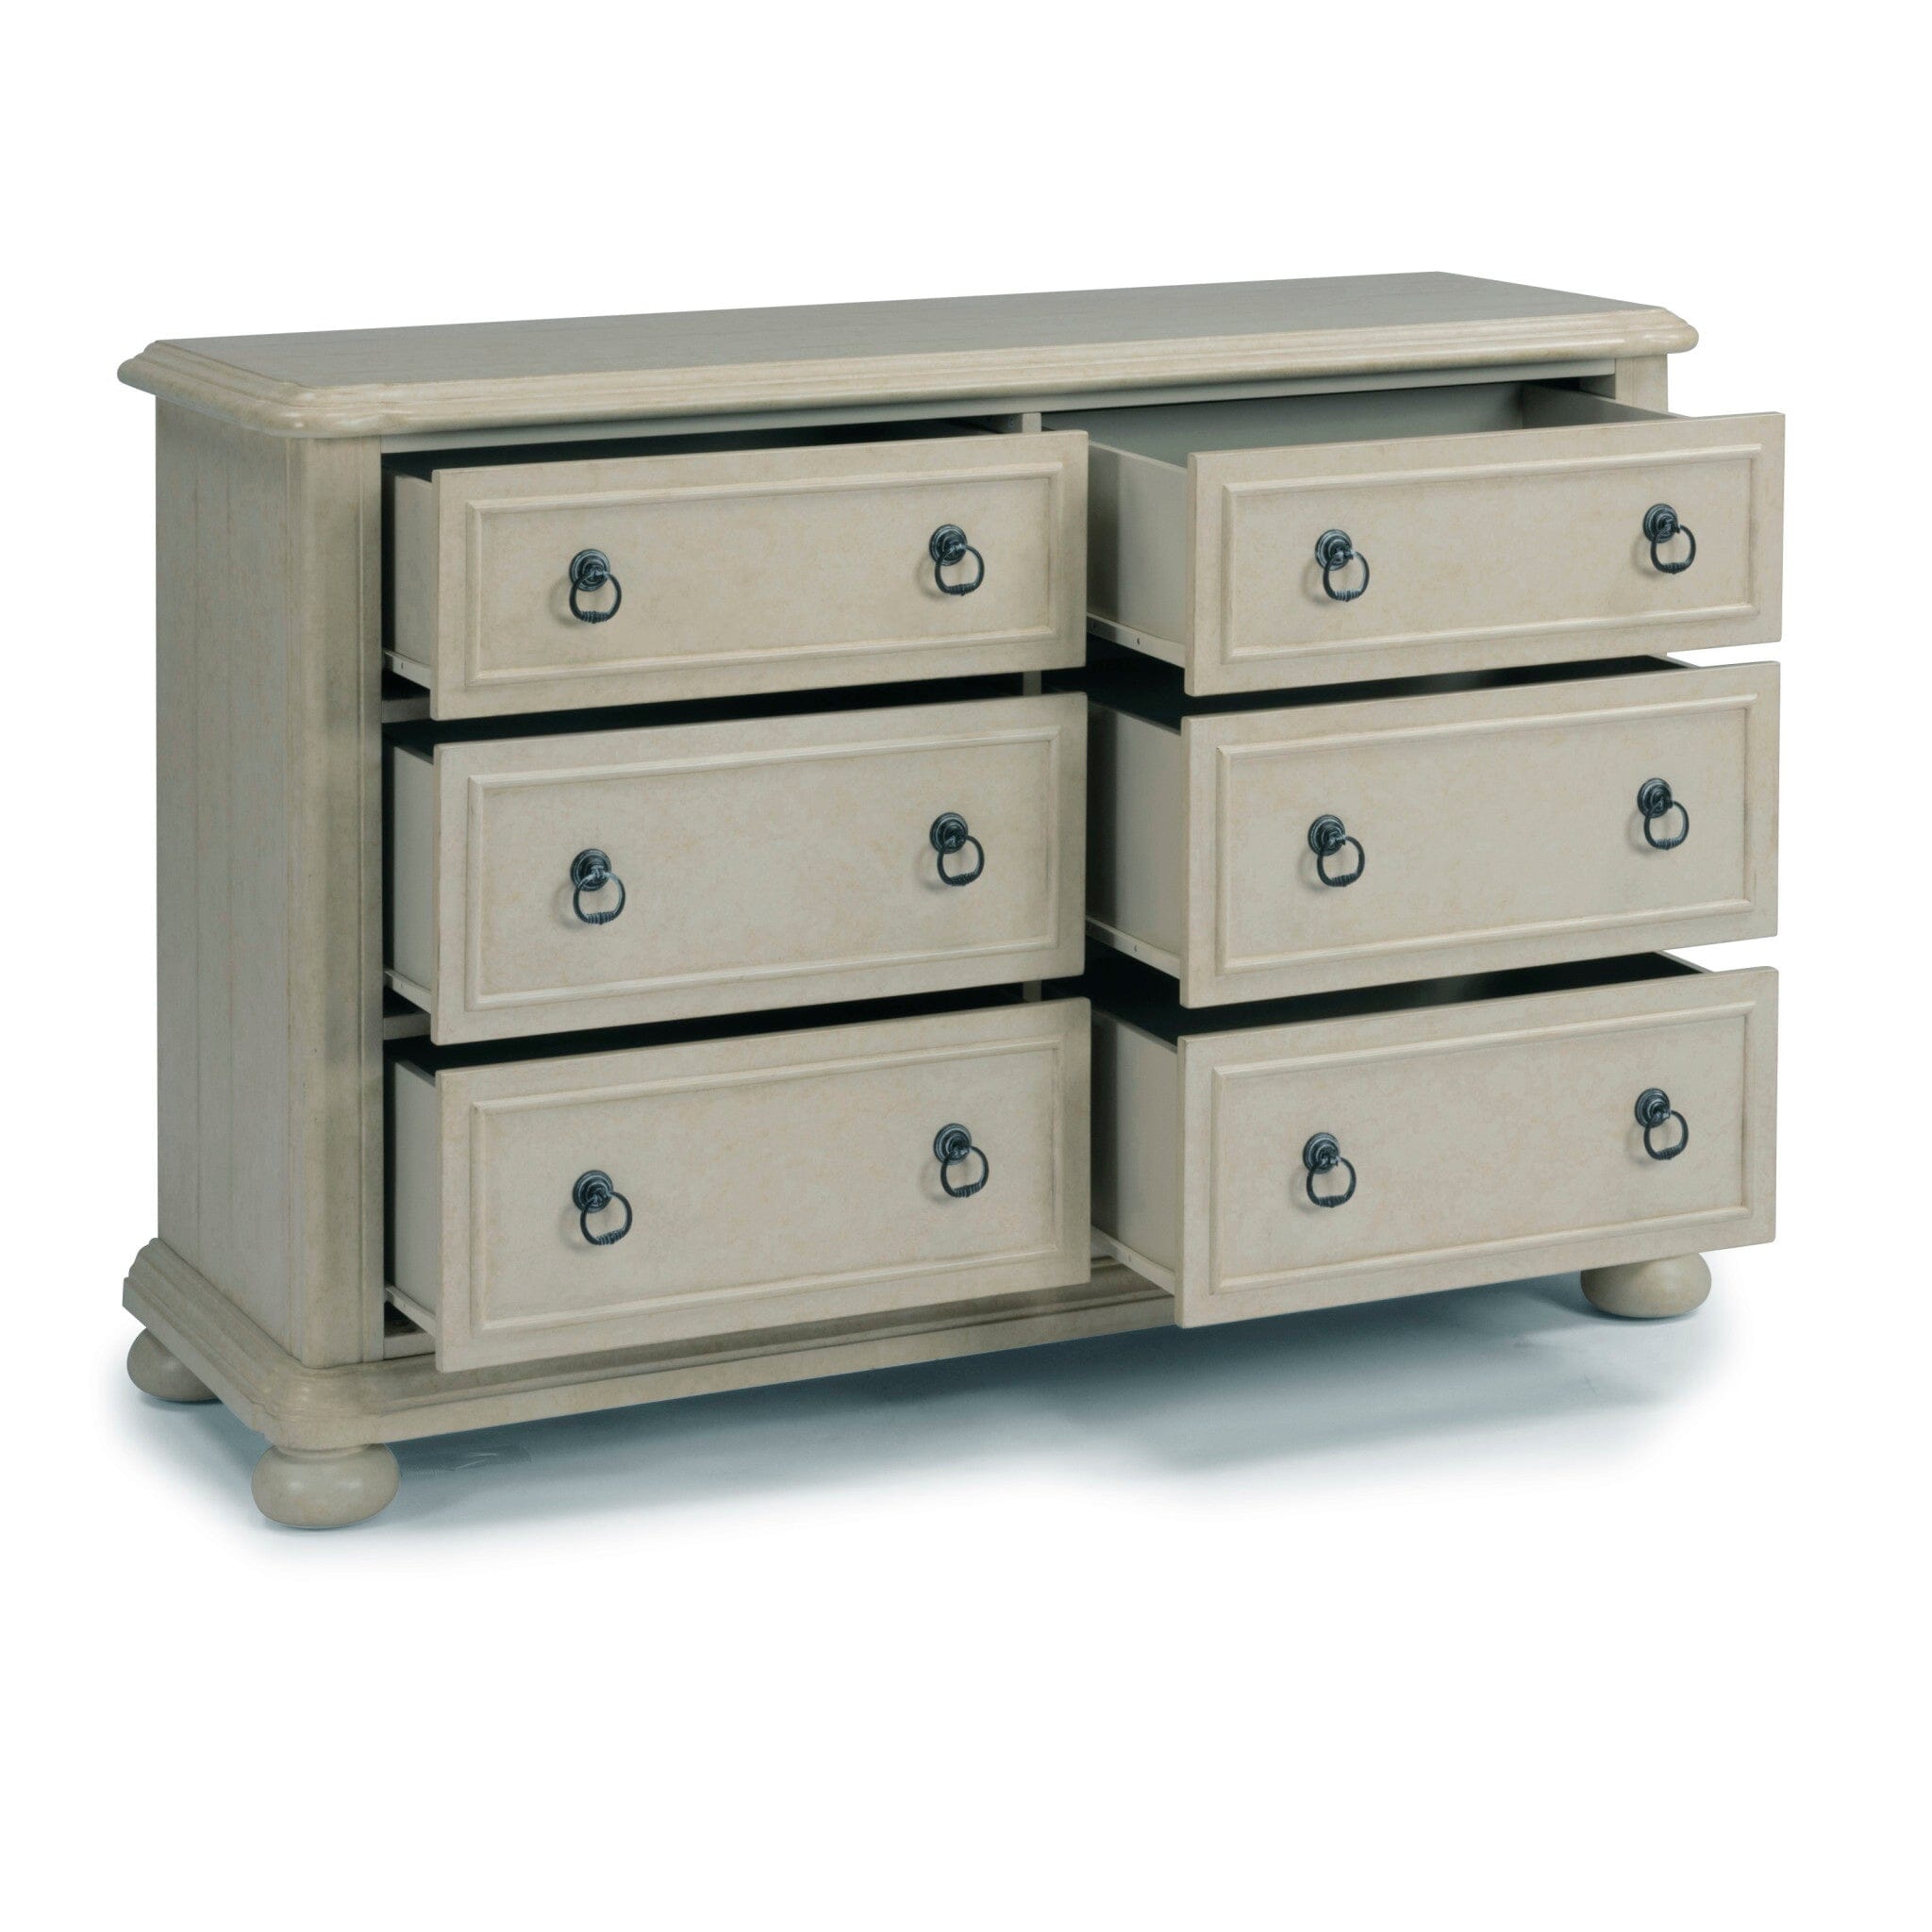 Rustic Farmhouse Dresser By Provence Dresser Provence